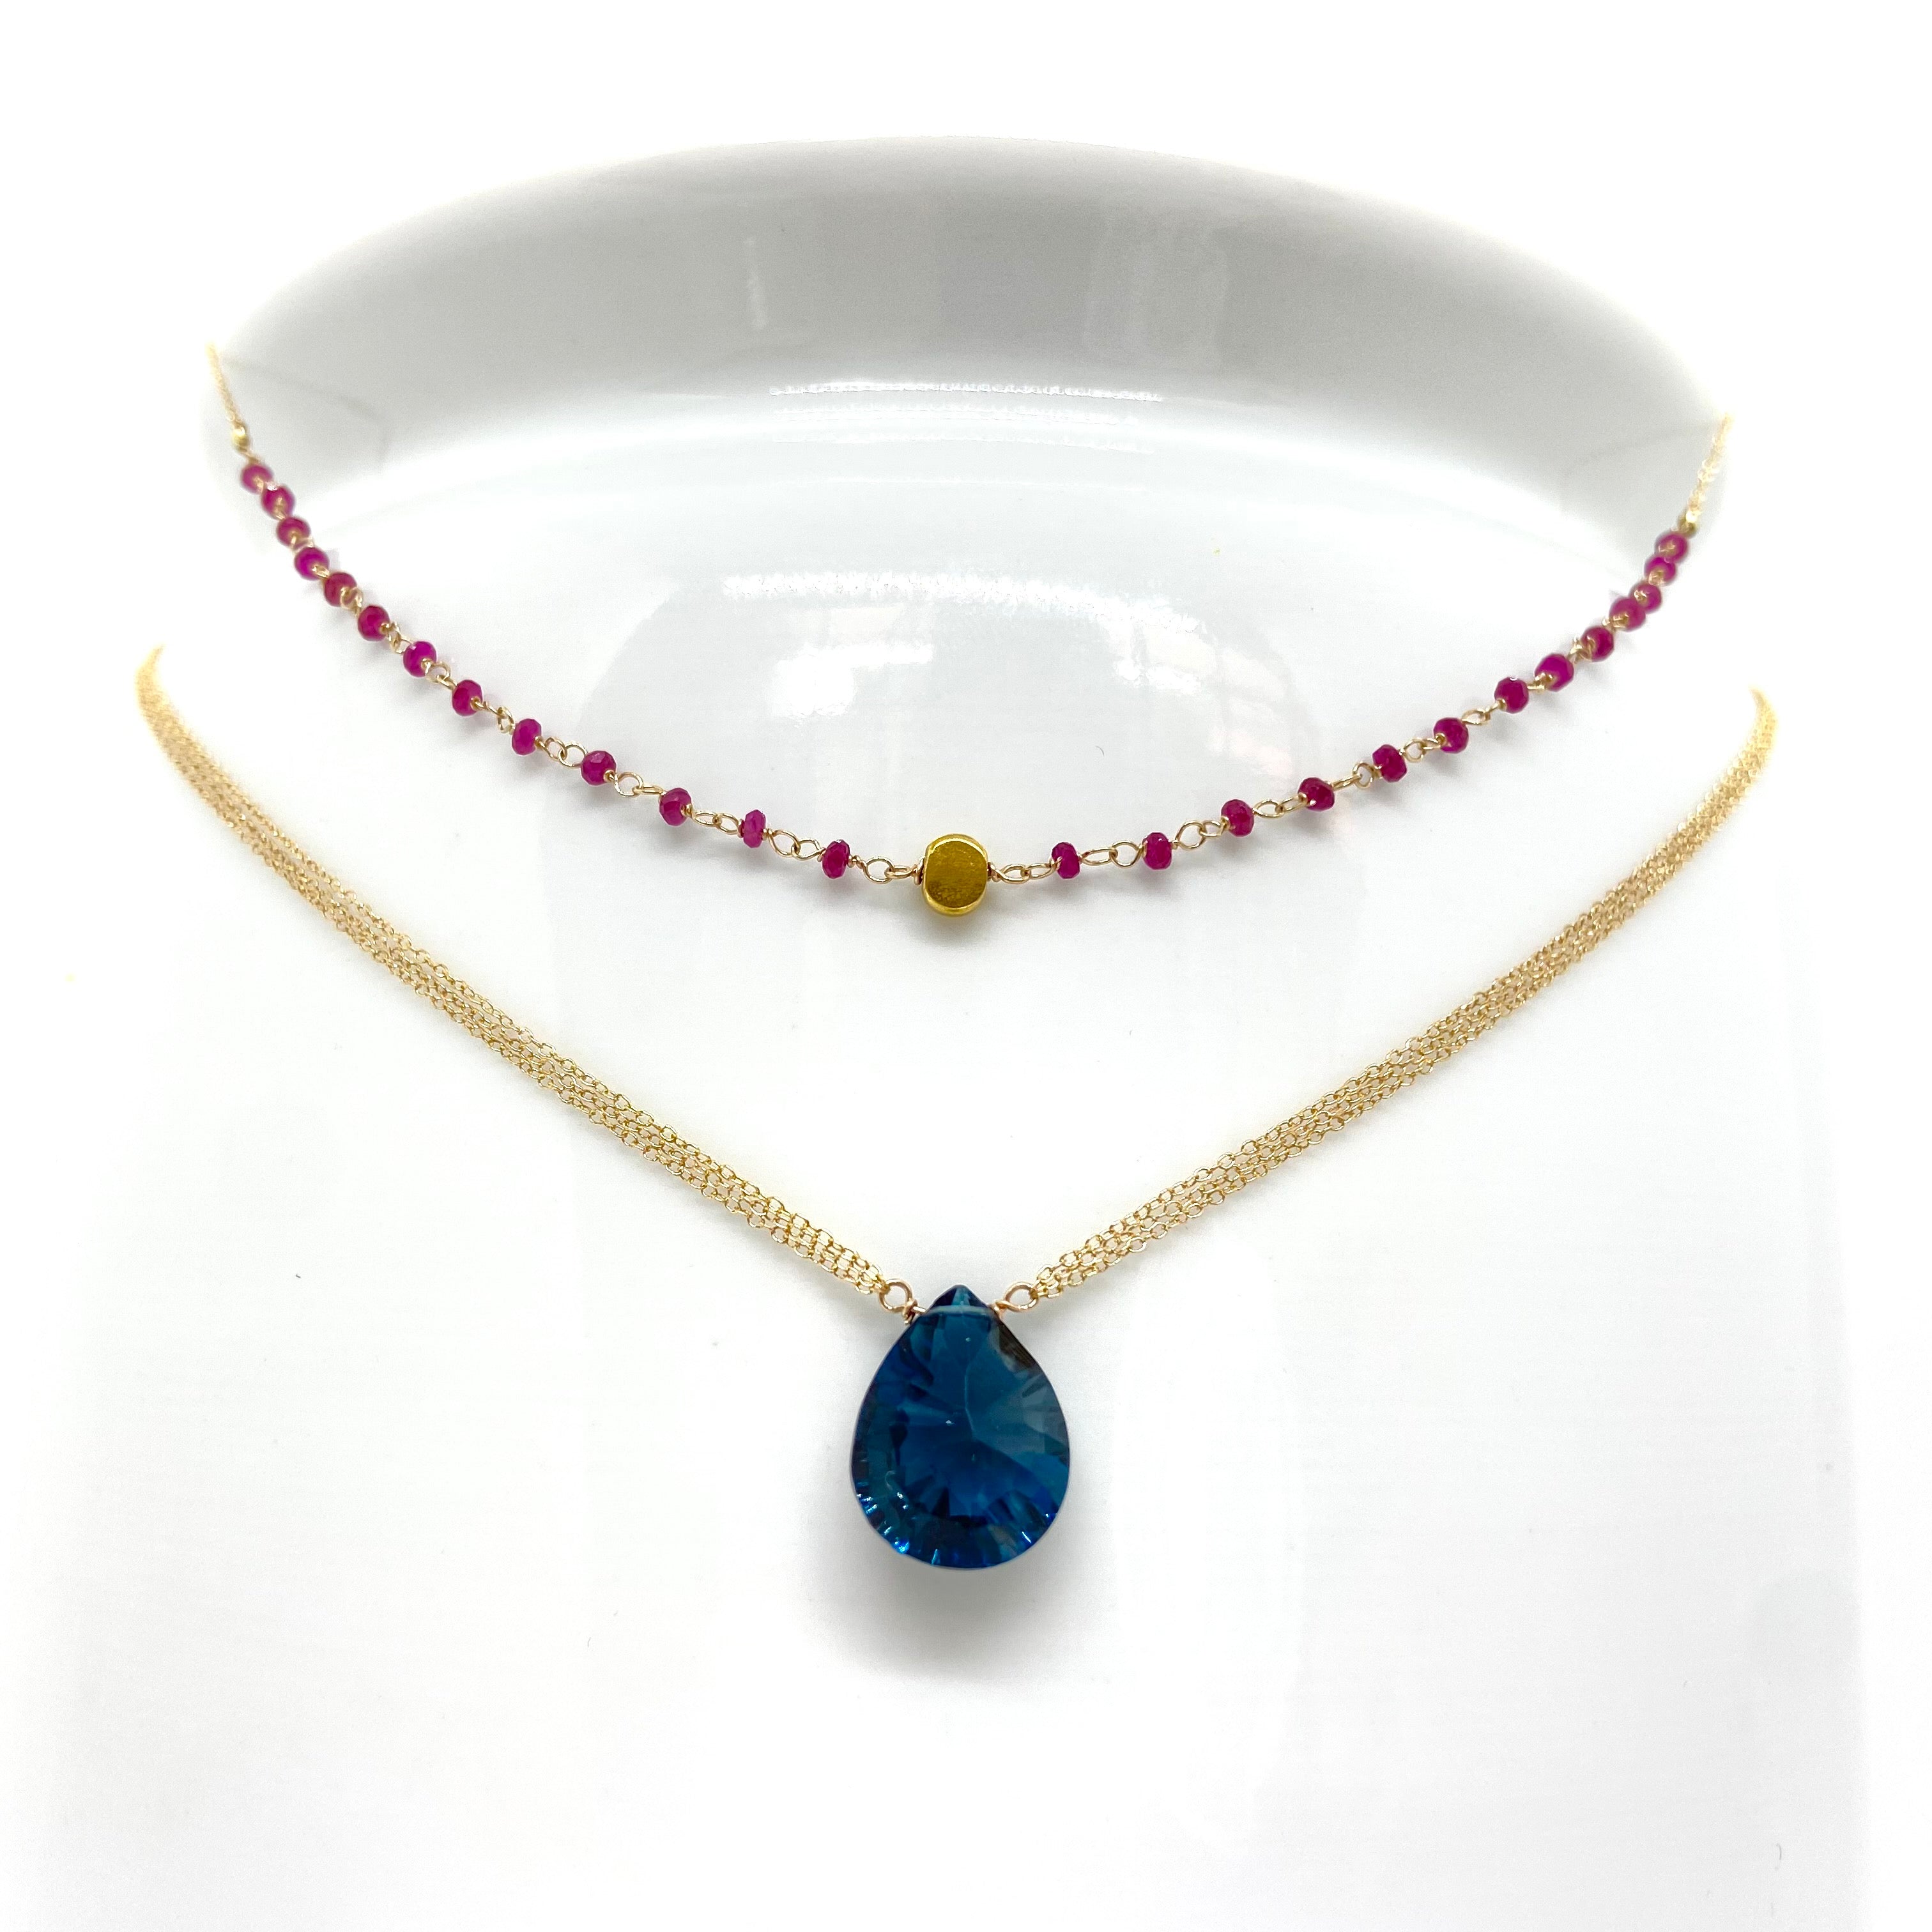 14k Gold Chain Necklace w/ 18k Gold Pendant, Rubies & 18k Gold Nuggets